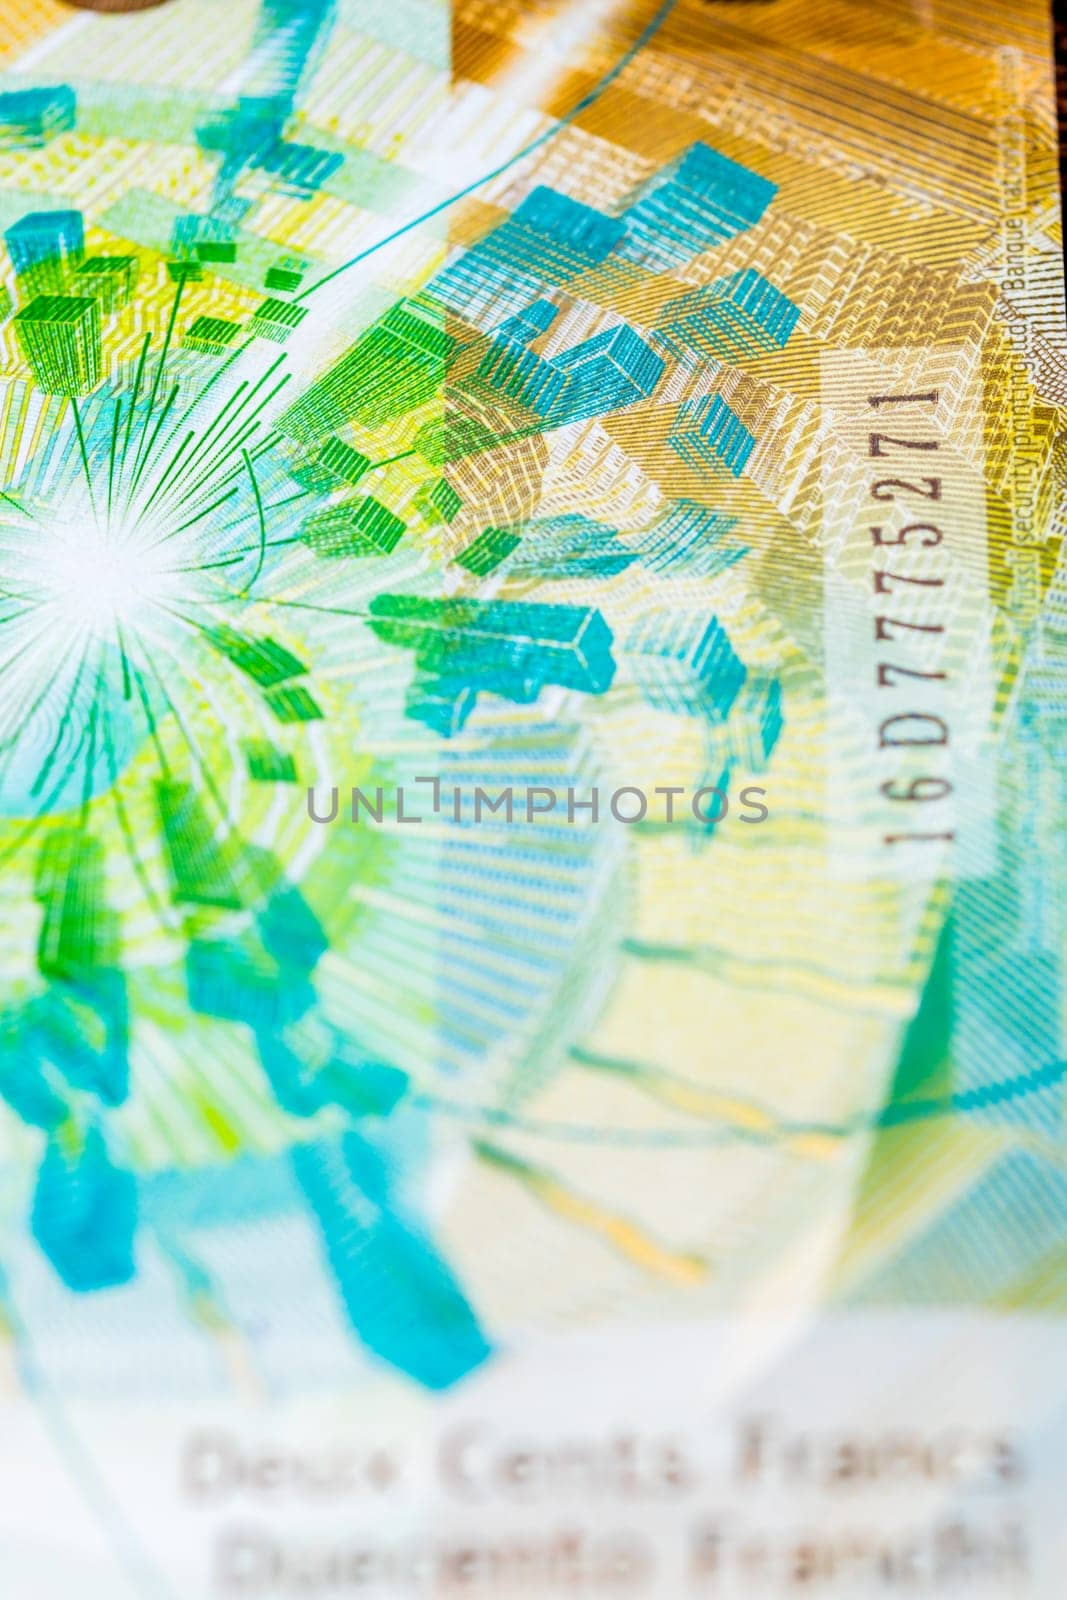 CHF money banknotes, detail photo of swiss franc. Swiss Franc currency